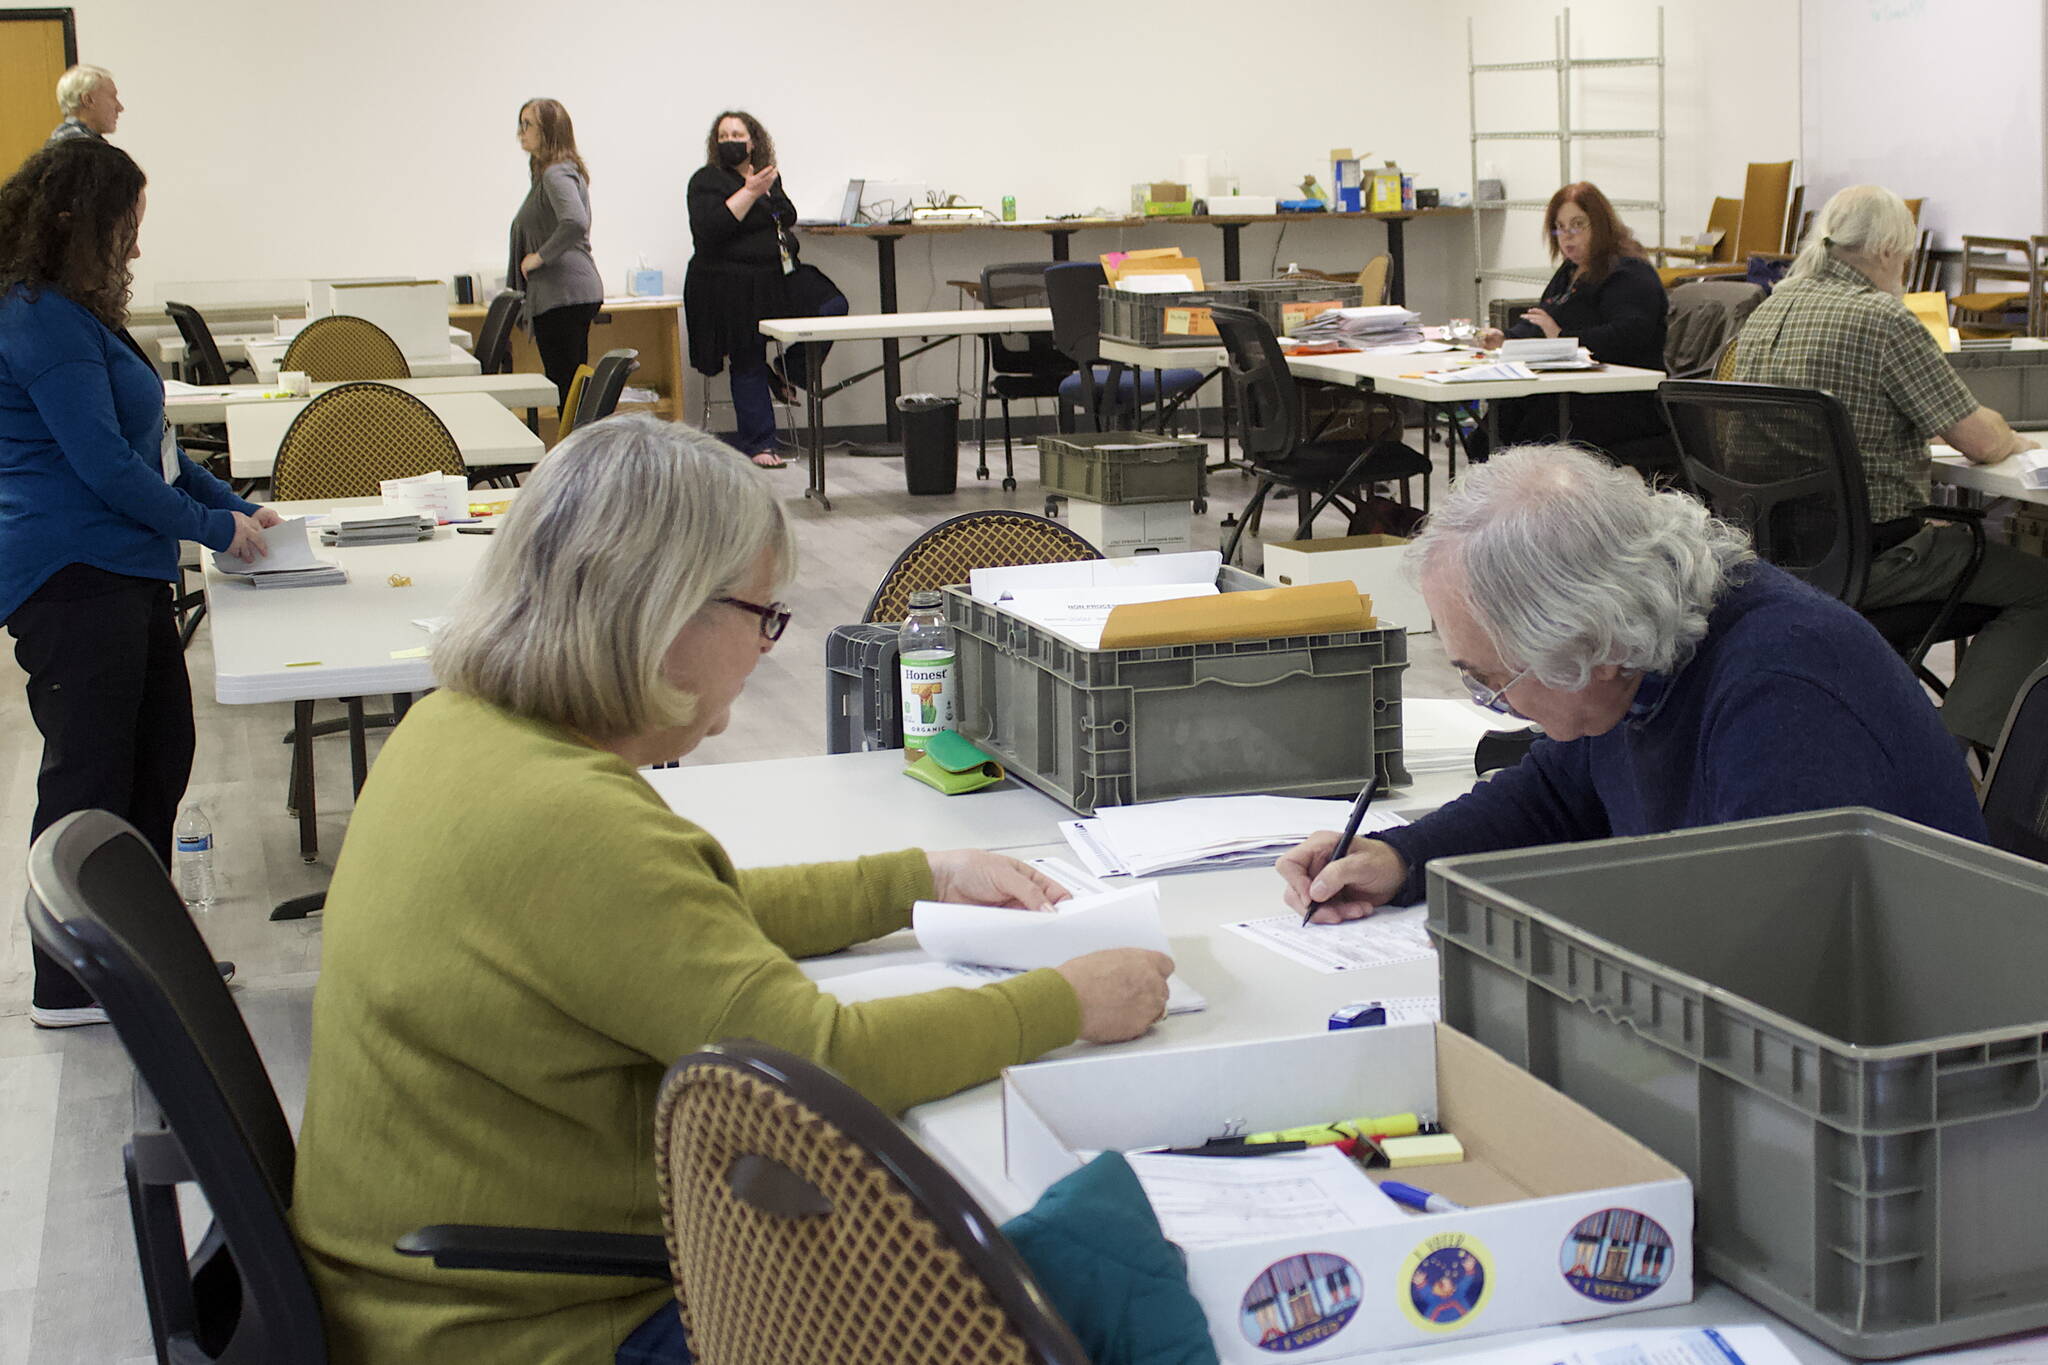 Mark Sabbatini / Juneau Empire 
Pat Tynan, left, and Tom Melville, review absentee ballots Tuesday at the Division of Elections office at the Mendenhall Mall. The review process is taking place in a separate room from where ballots are being tallied for the official results.